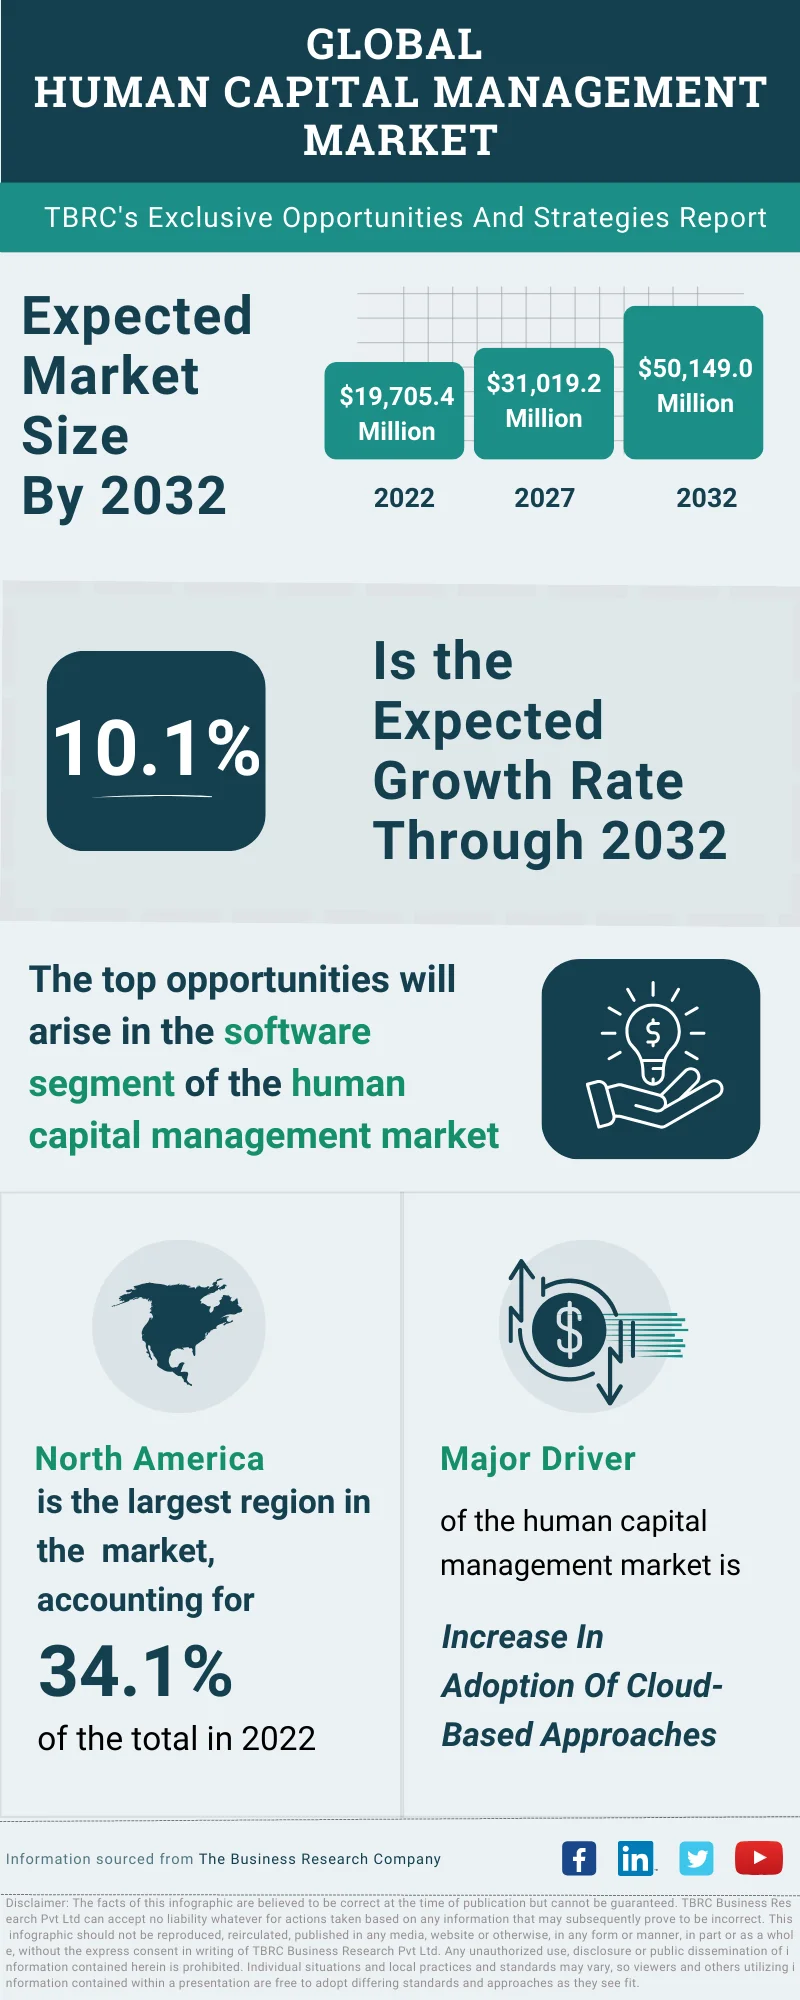 Human Capital Management Global Market Opportunities And Strategies To 2032